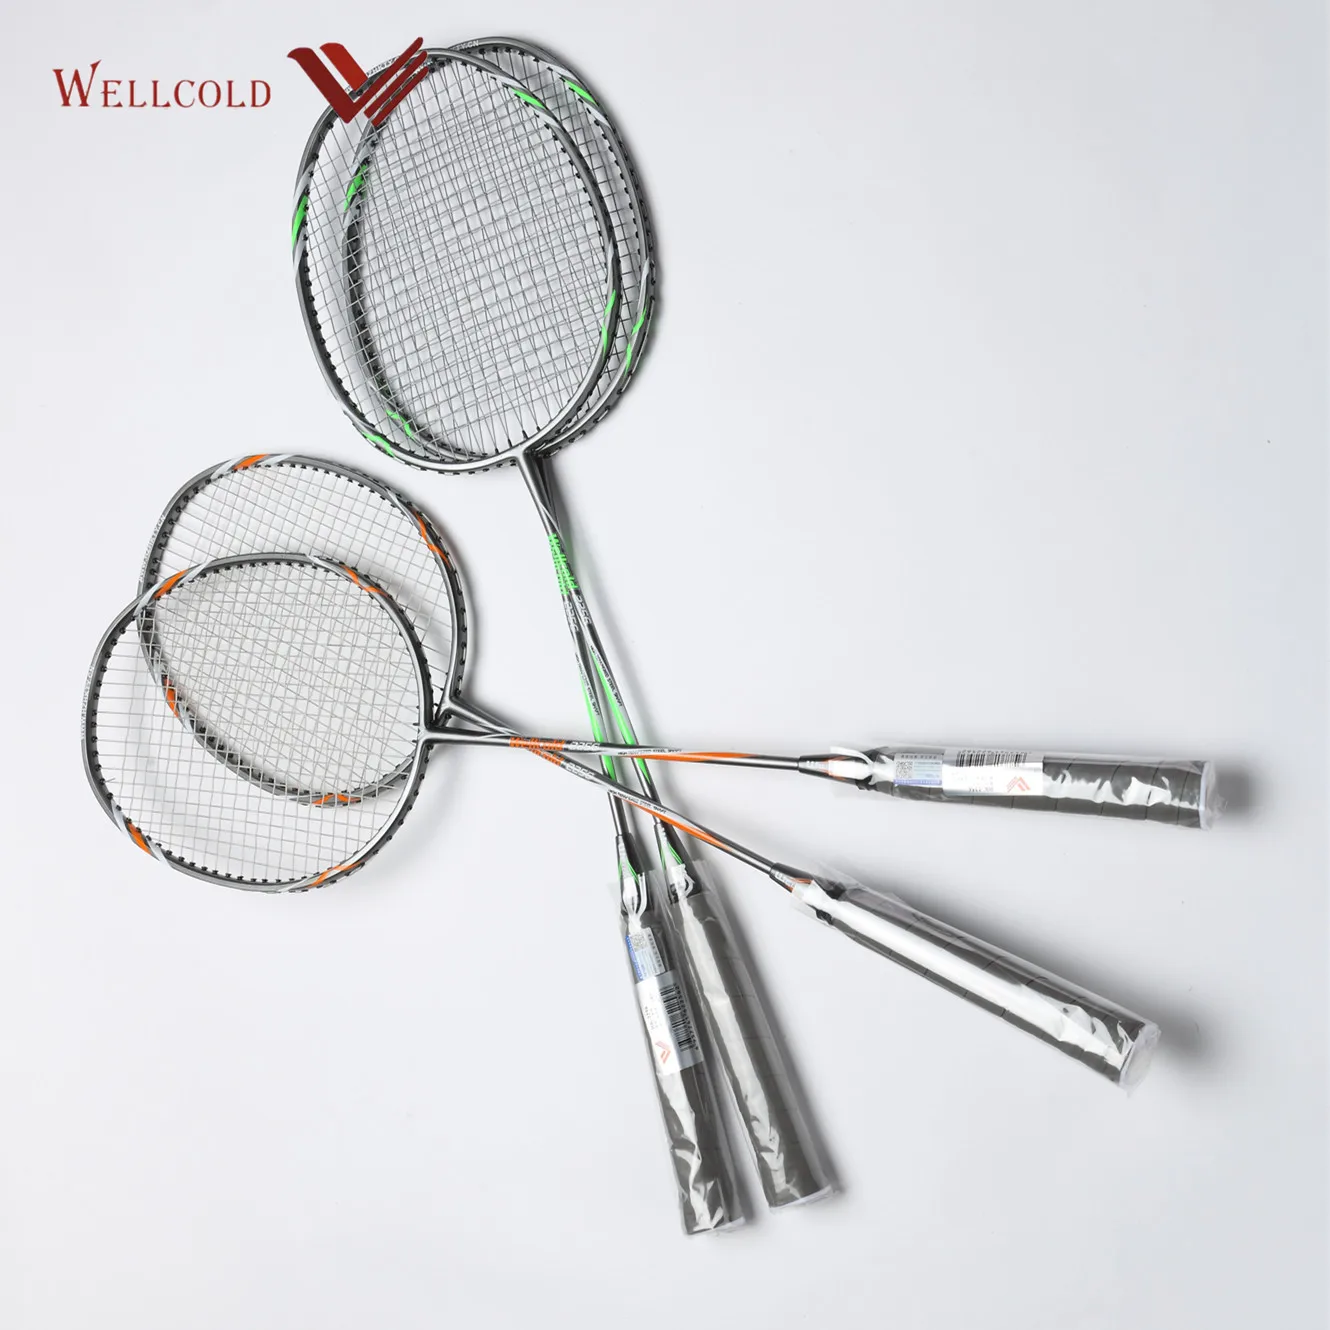 
Wellcold low price good rigidity fixed badminton bag racket for wholesale 